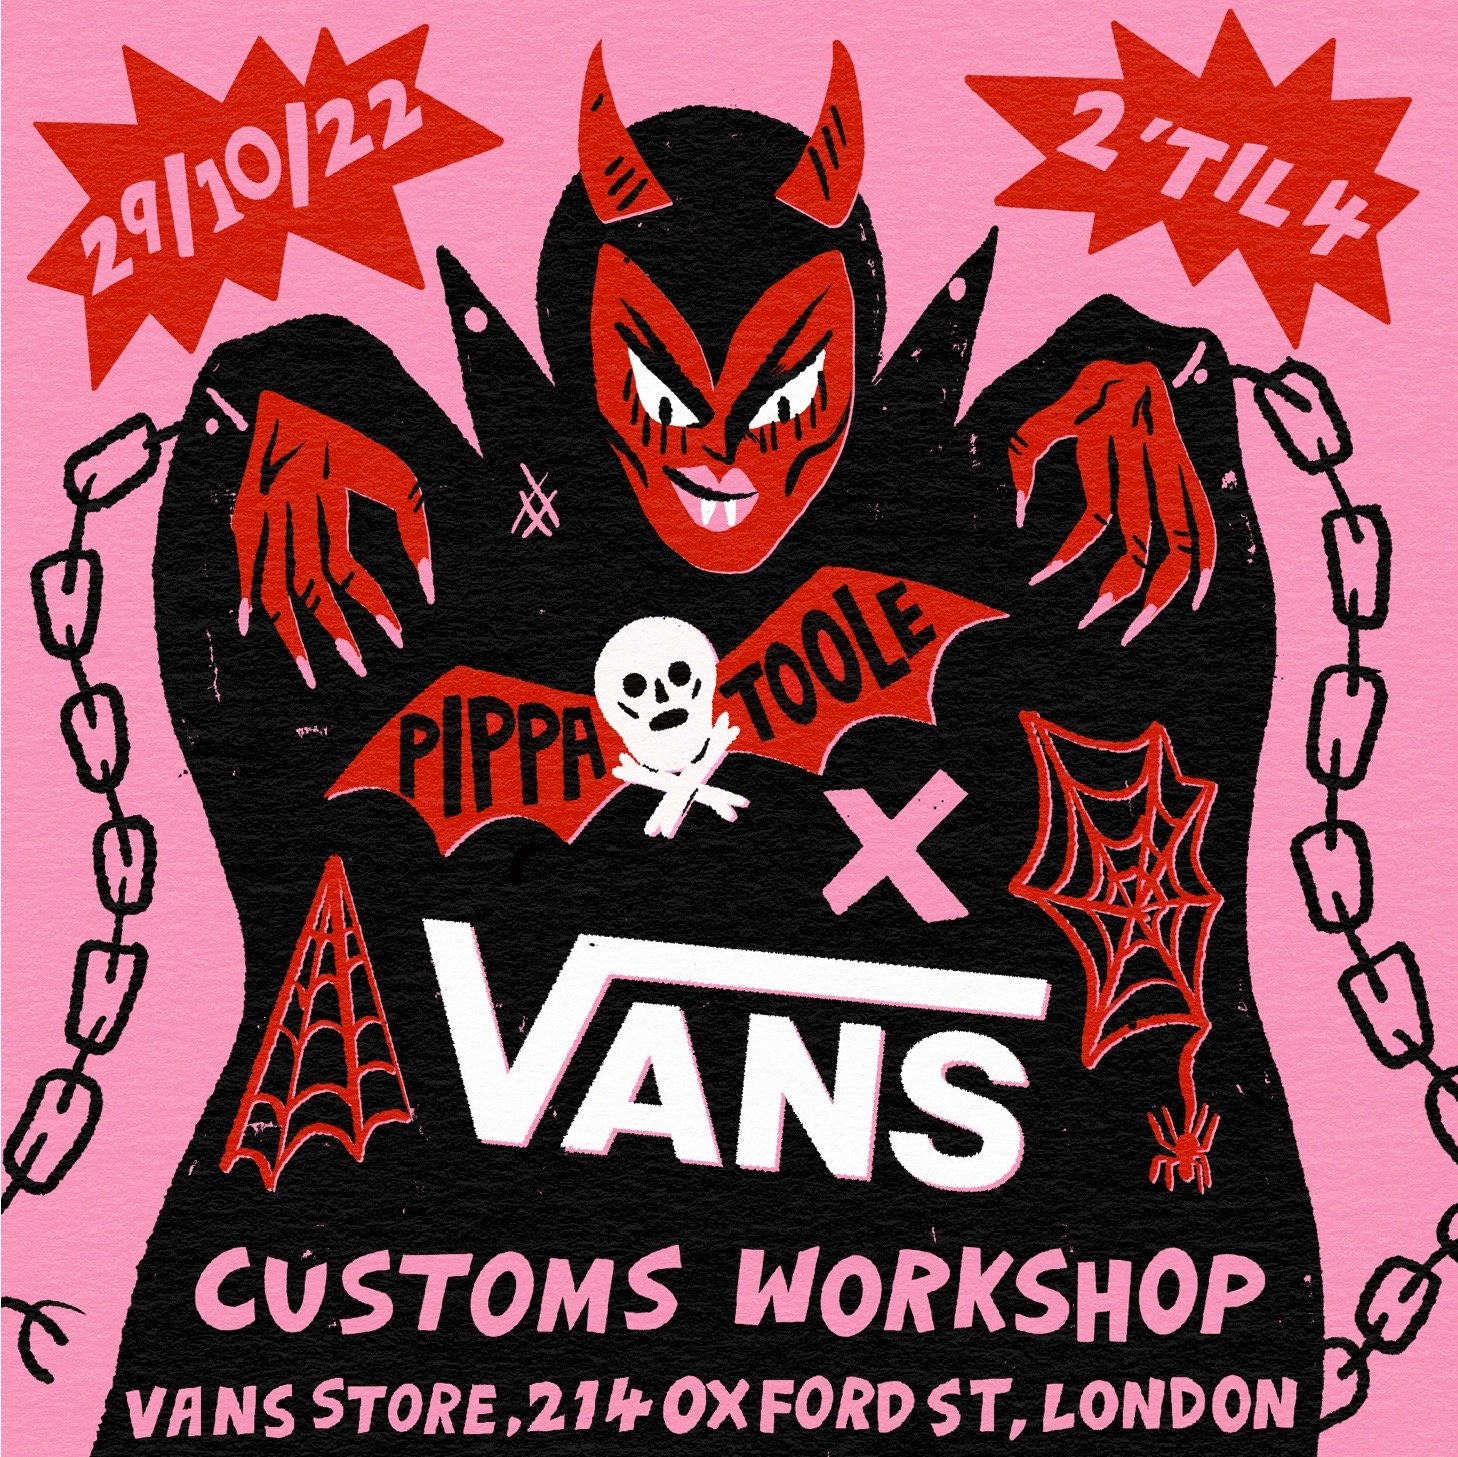 Vans Workshop with Pippa Toole